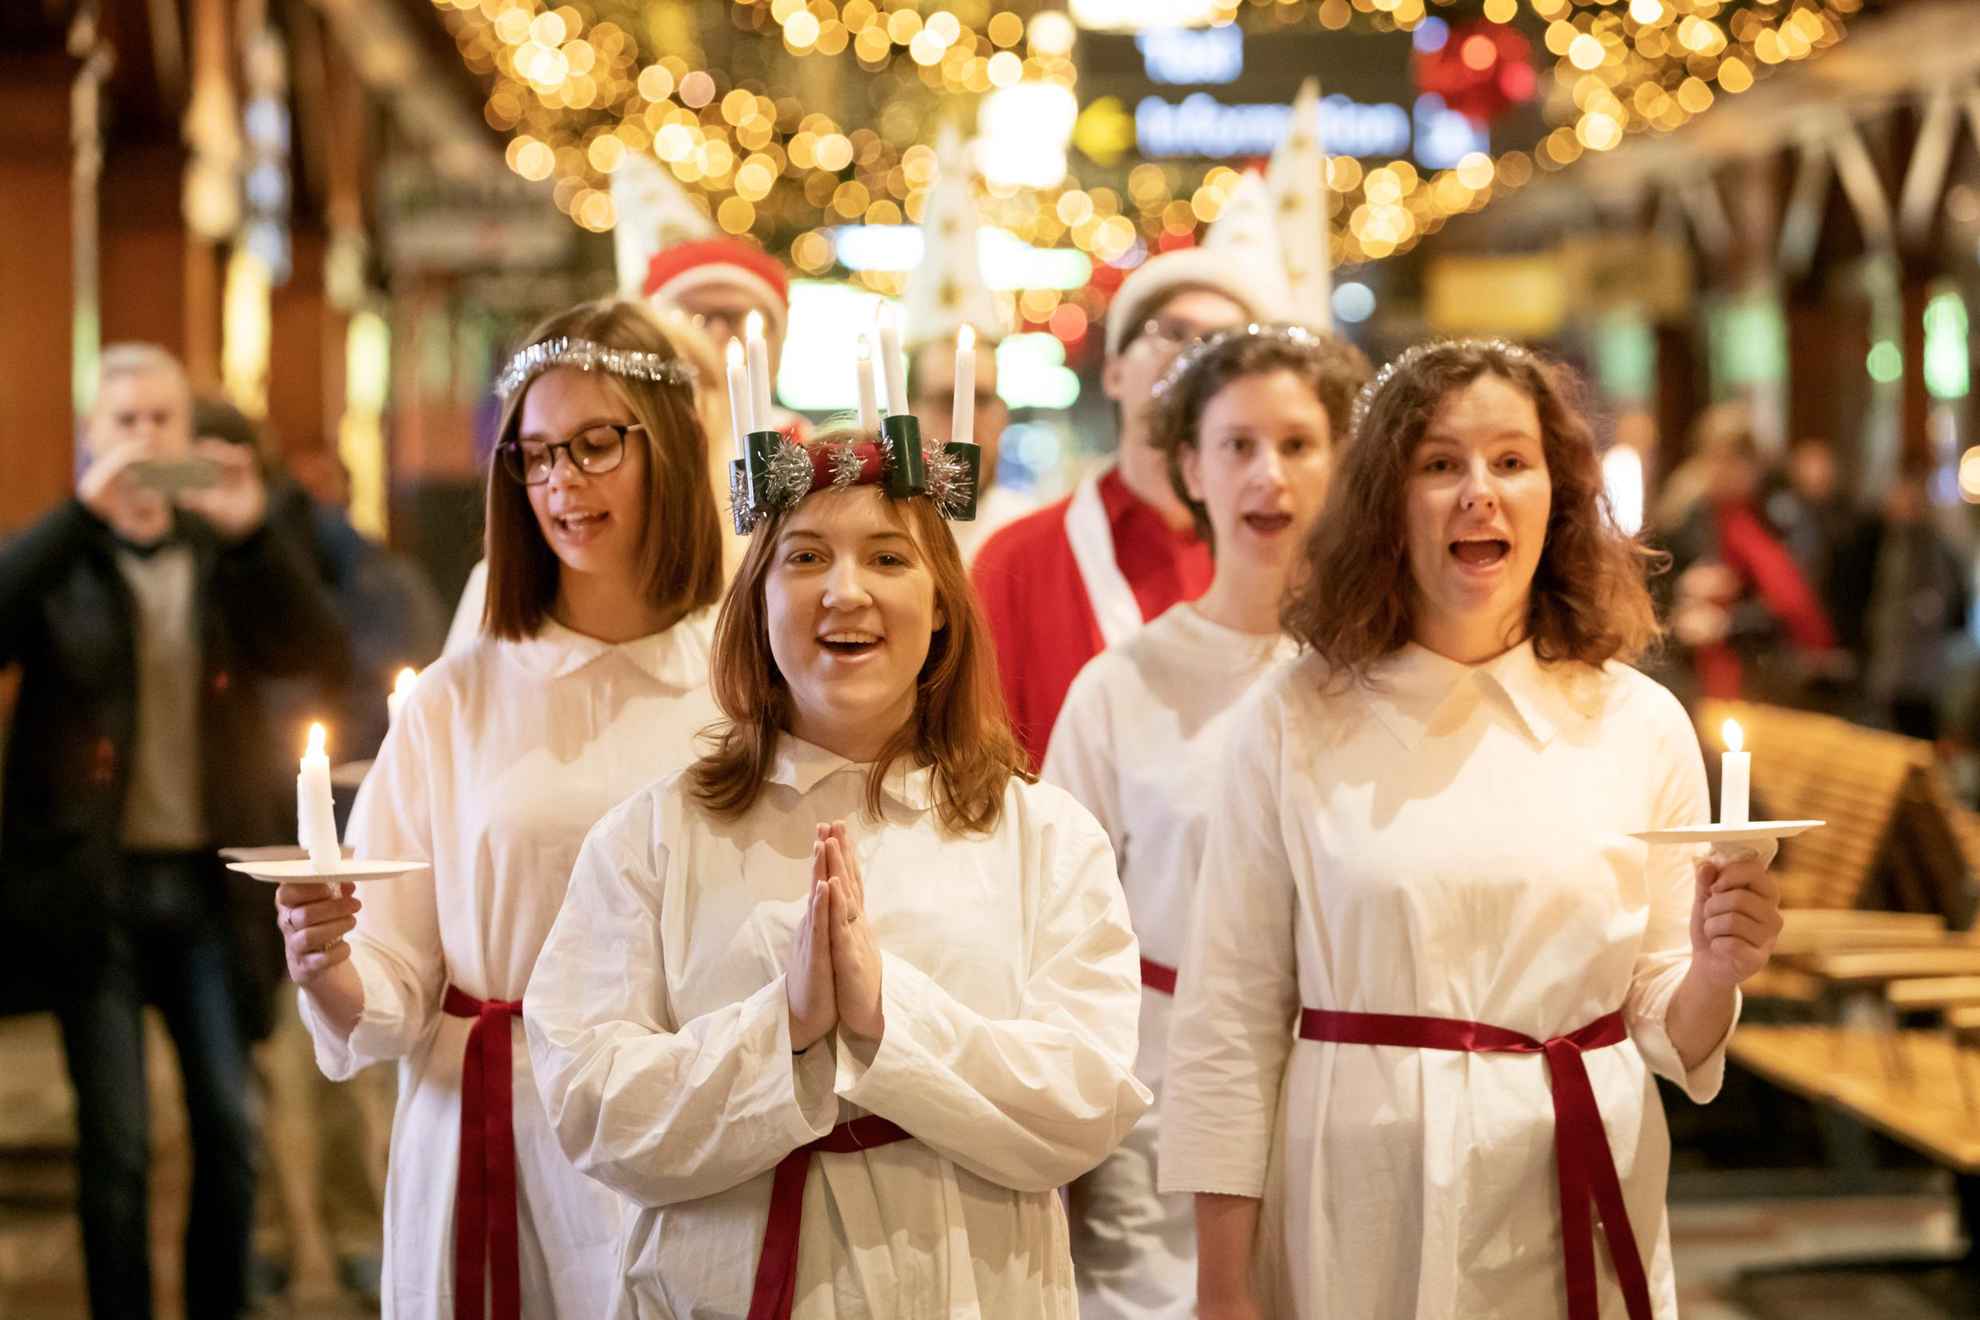 Girls dressed in white robes, holding candles and singing inside a train station.